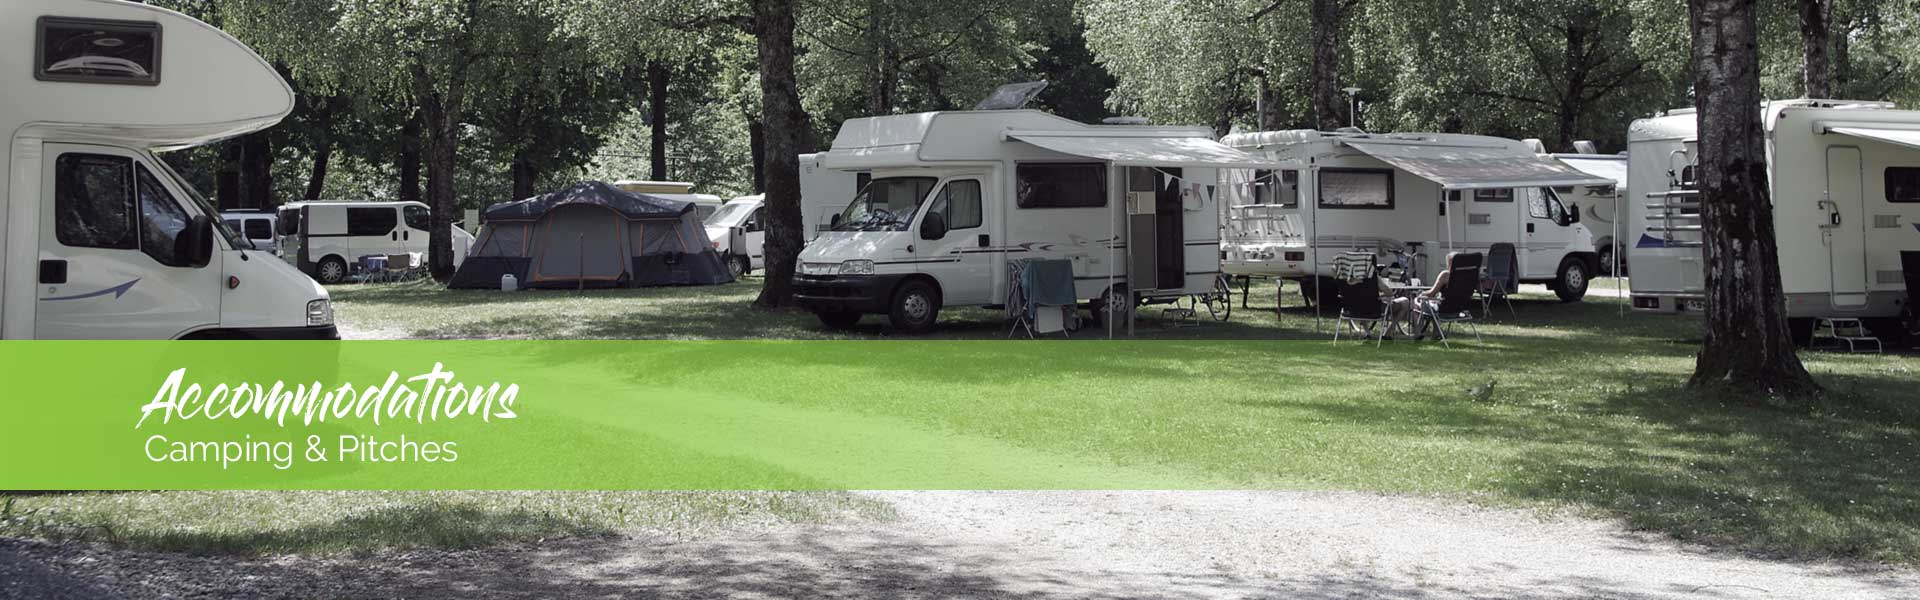 Pitches Campsites in the Harz Mountains